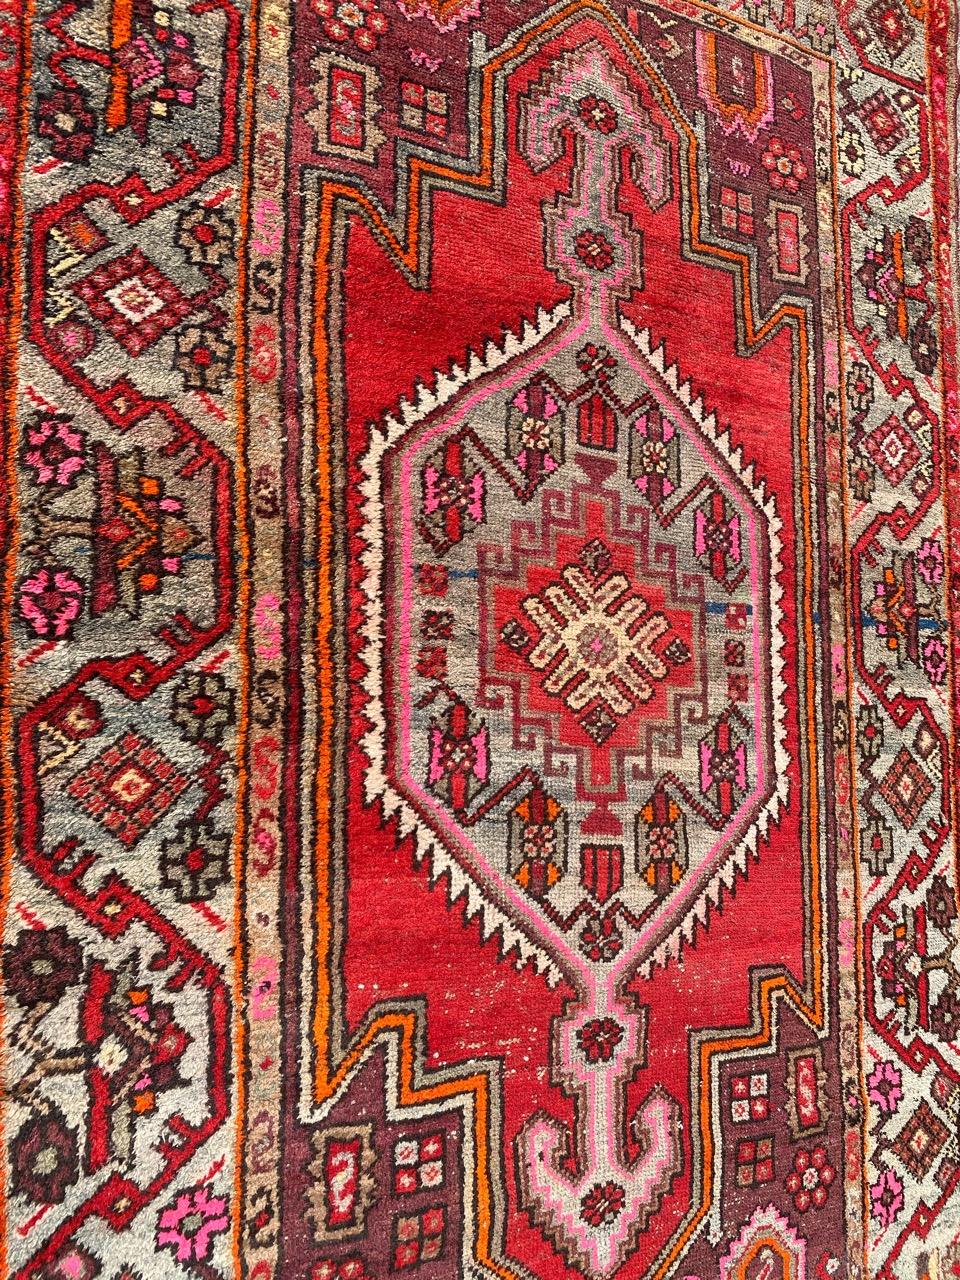 Nice Hamadan rug with beautiful geometrical tribal design and beautiful colors, entirely hand knotted with wool velvet on cotton foundation.

✨✨✨
